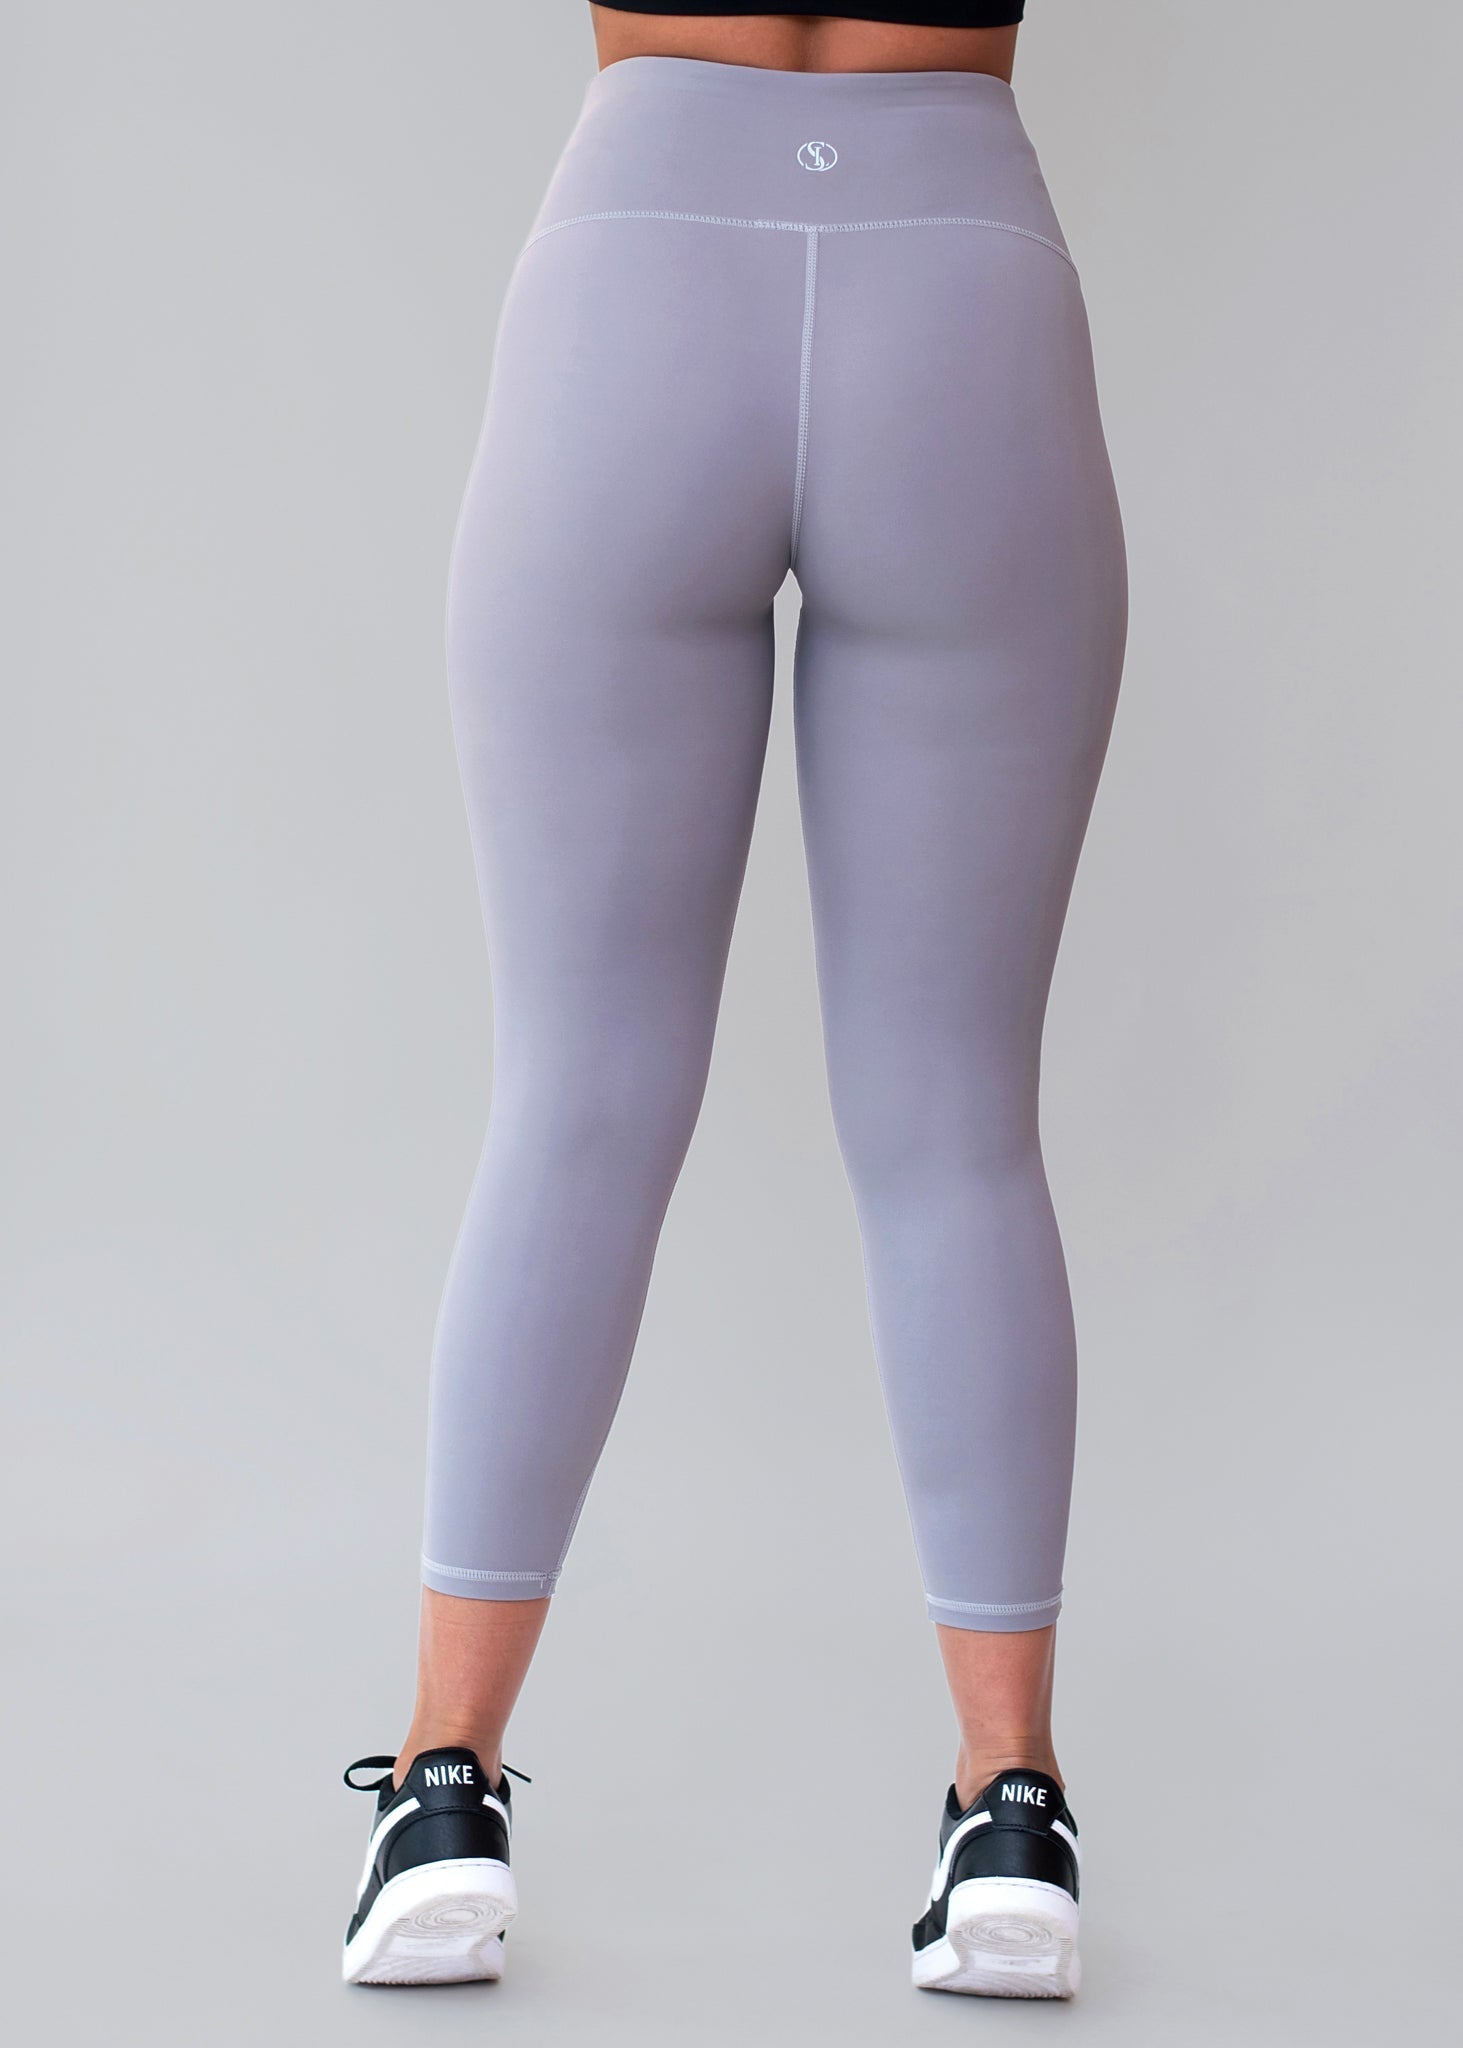 Barely There High-Waist Legging